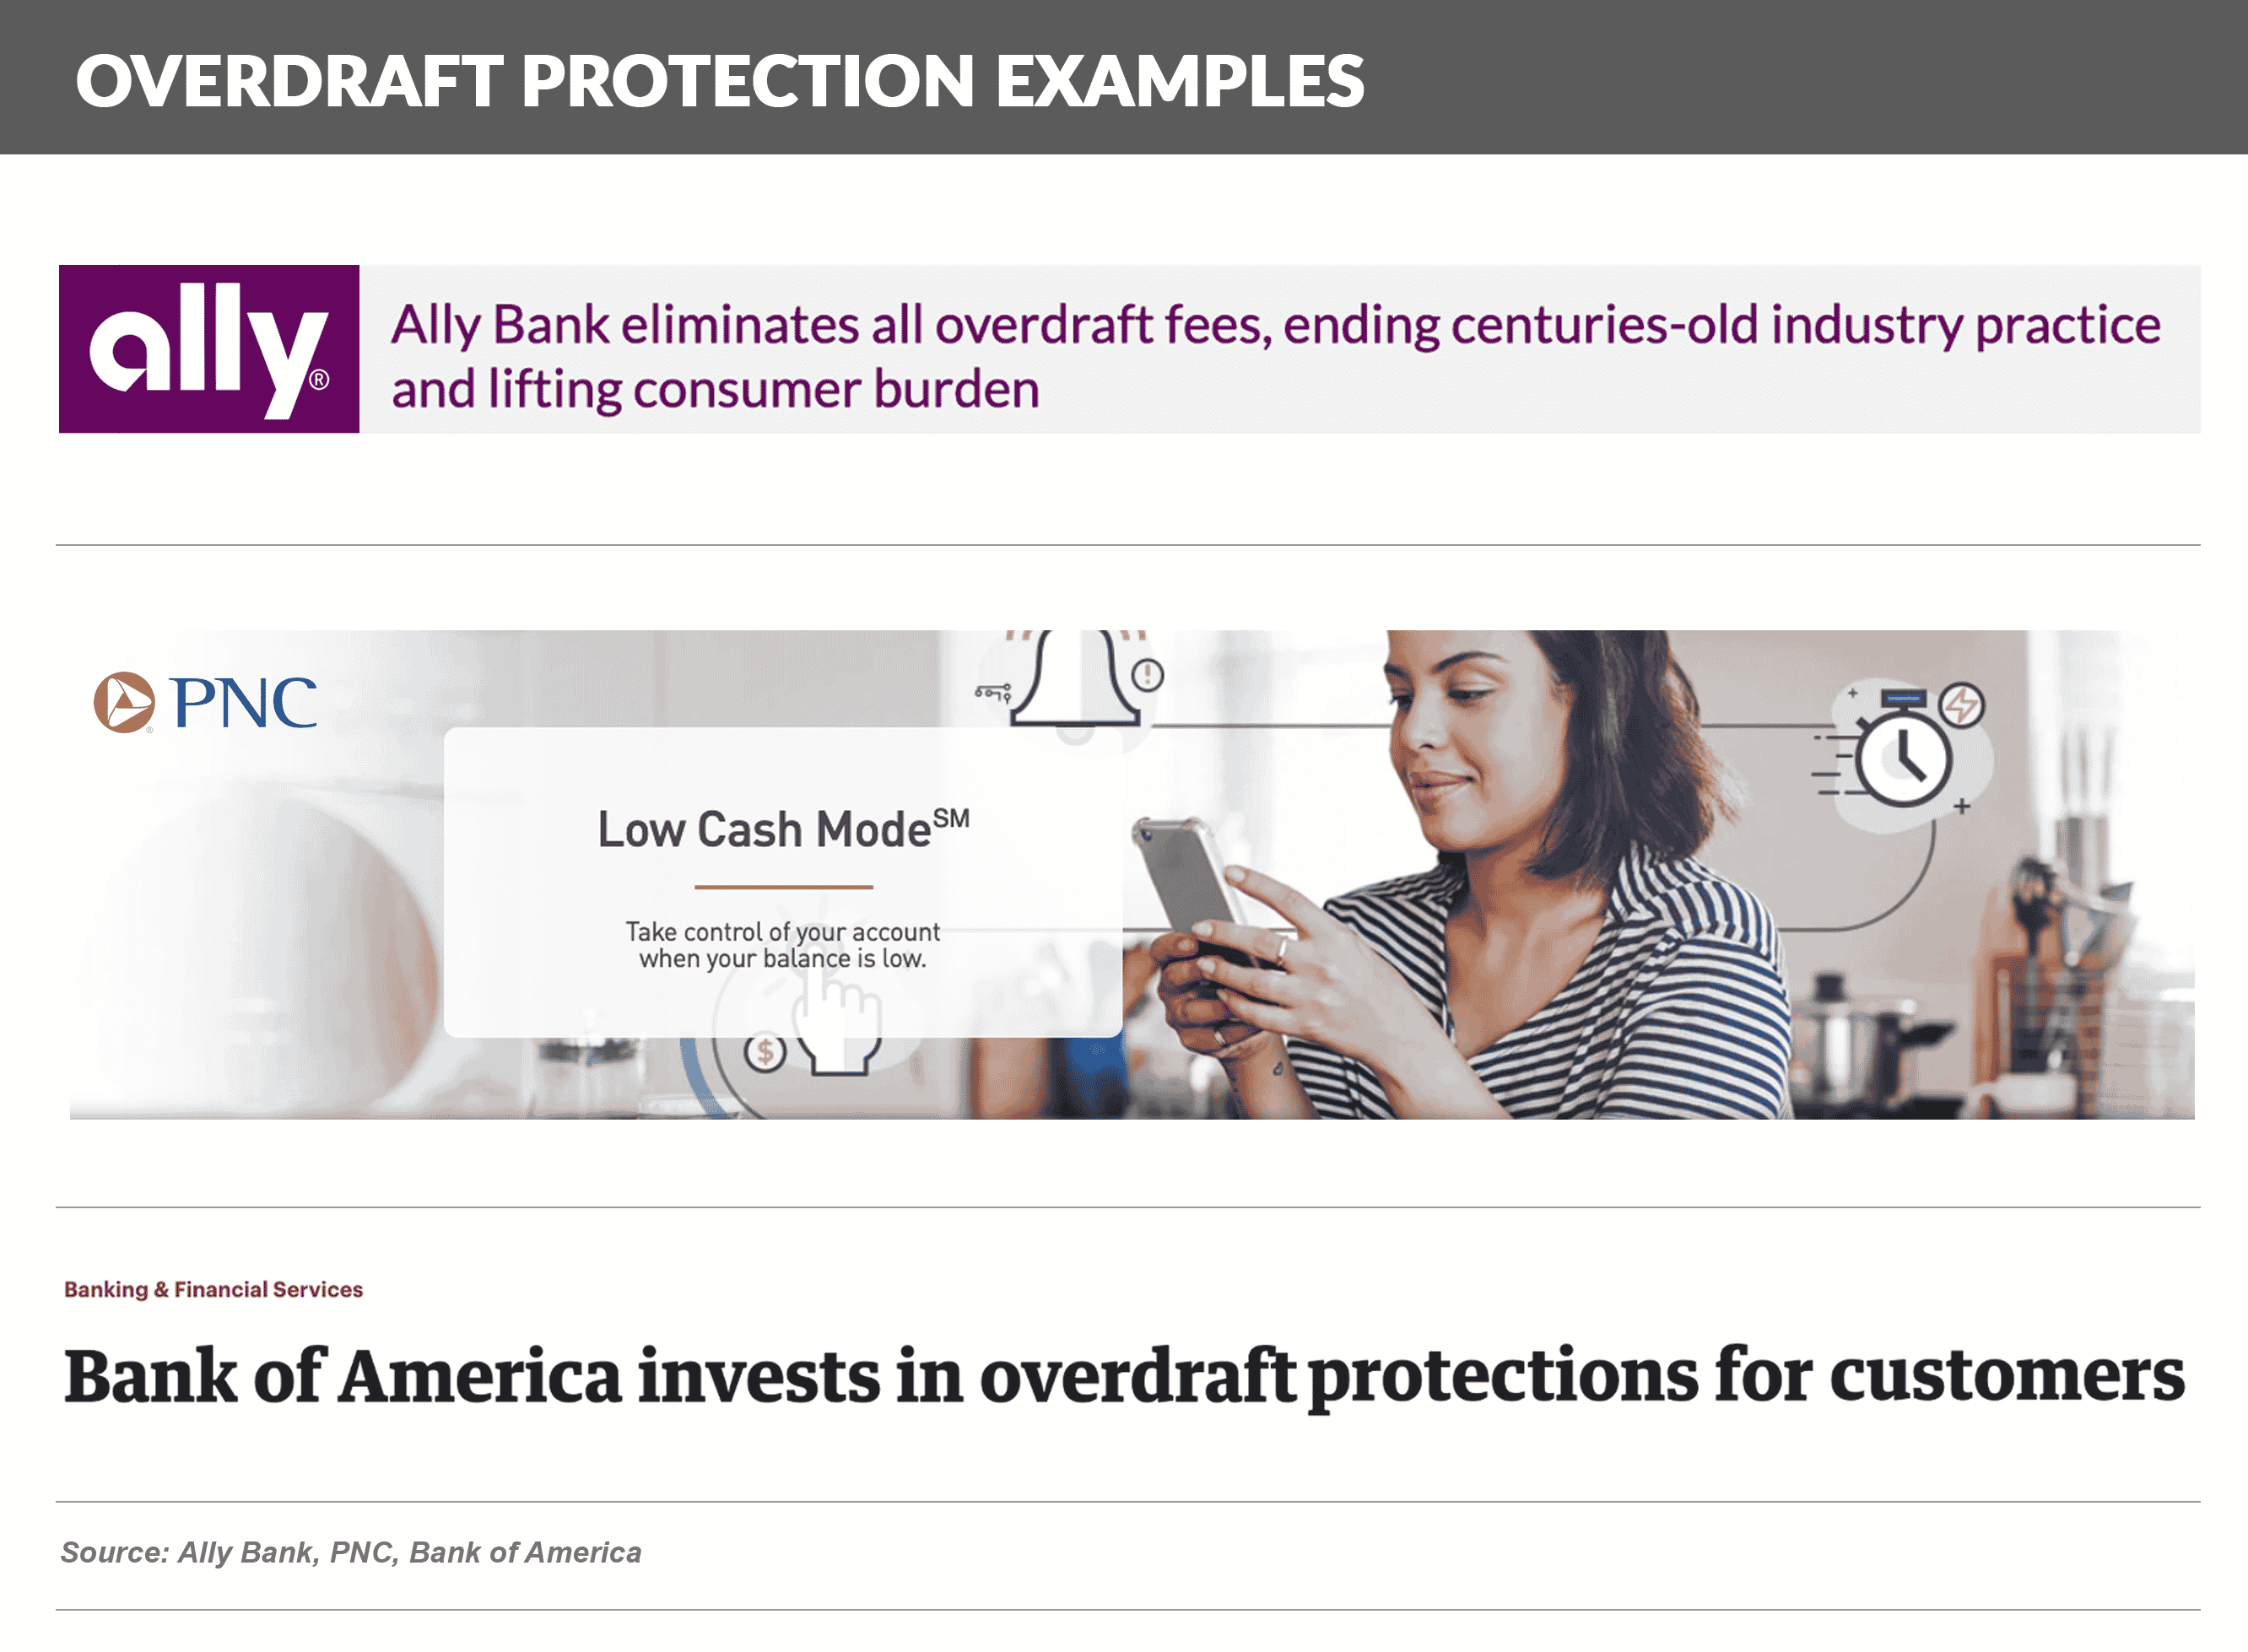 Overdraft protection examples